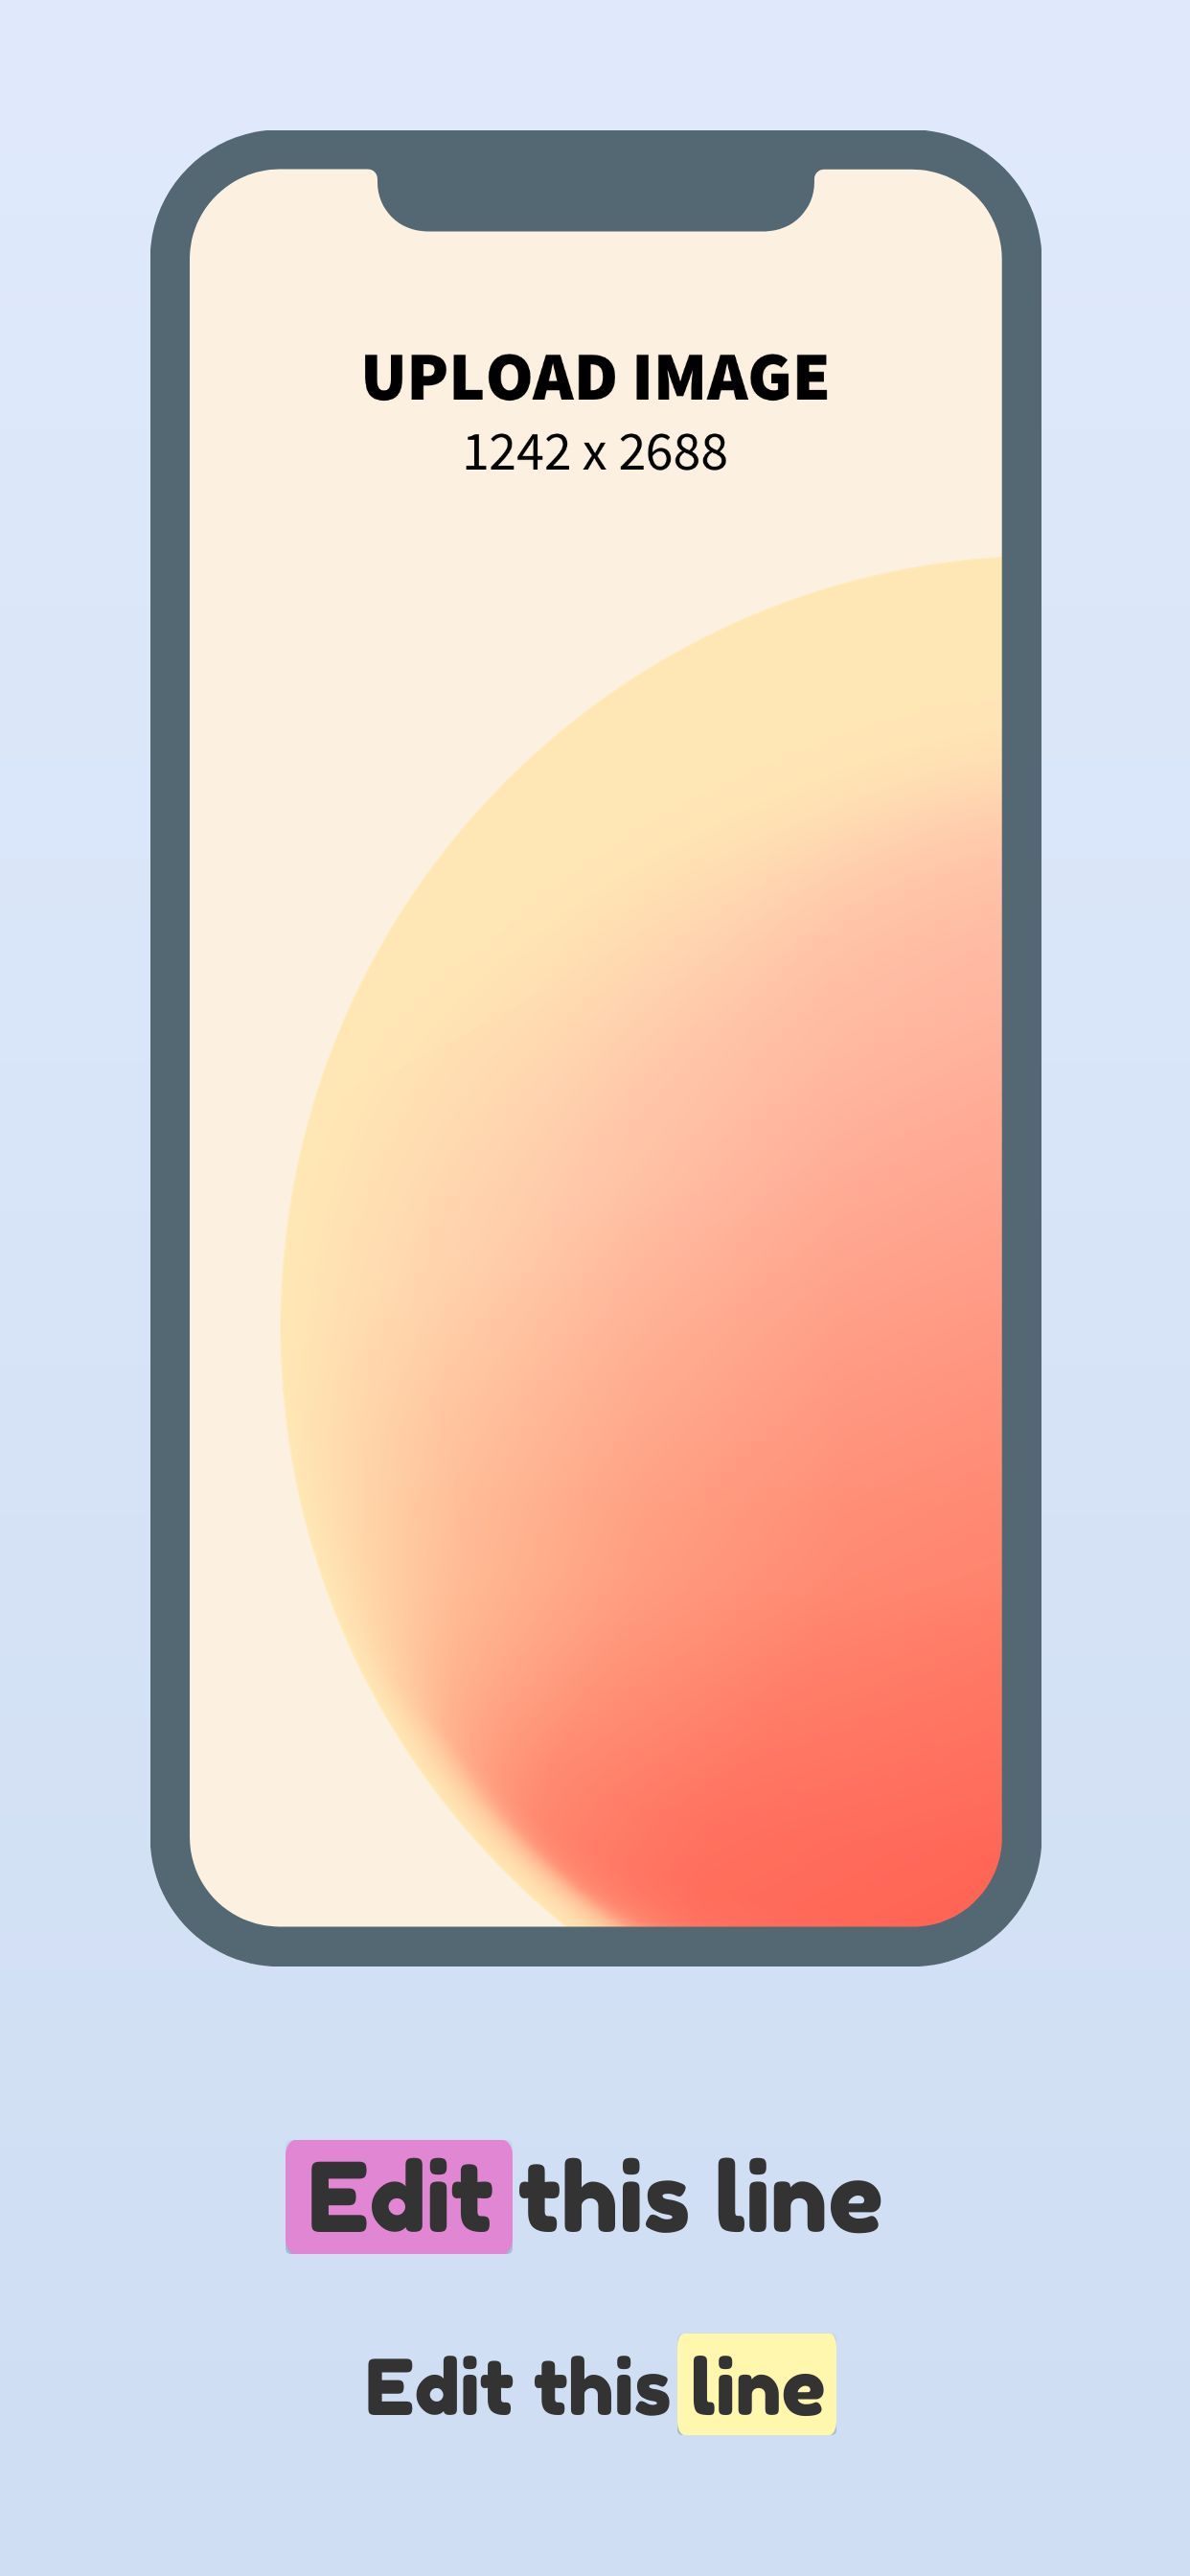 iPhone XS Max Screenshot 15 template. Quickly edit text, colors, images, and more for free.